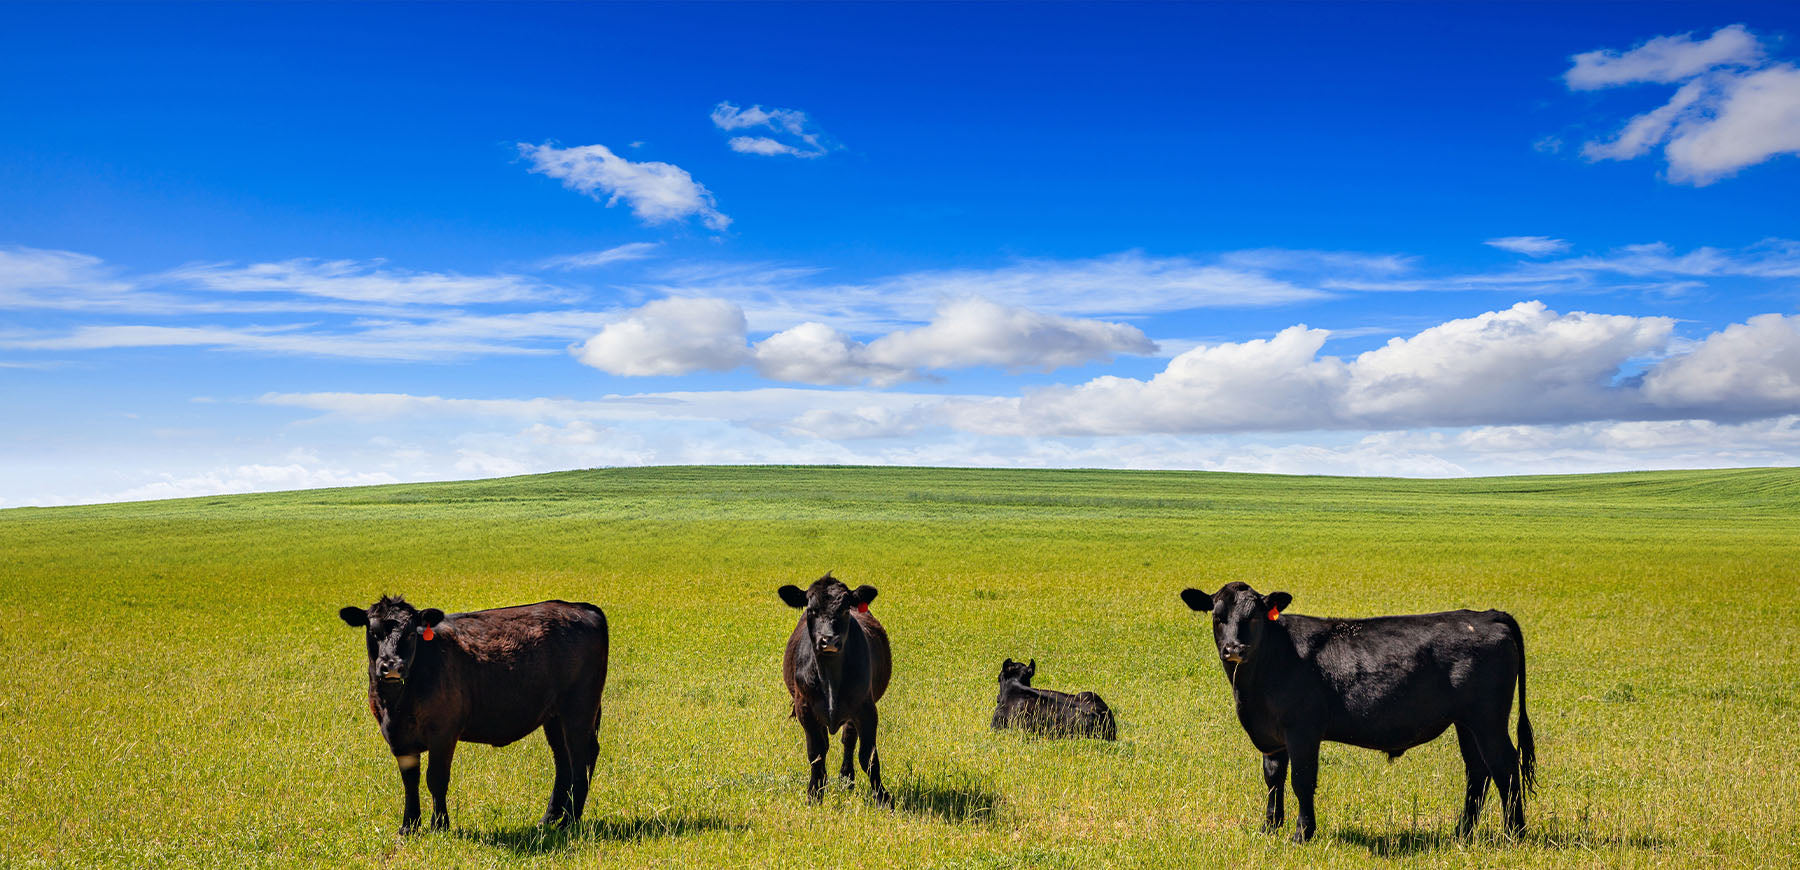 A sunny field of black cows against a bright blue sky.